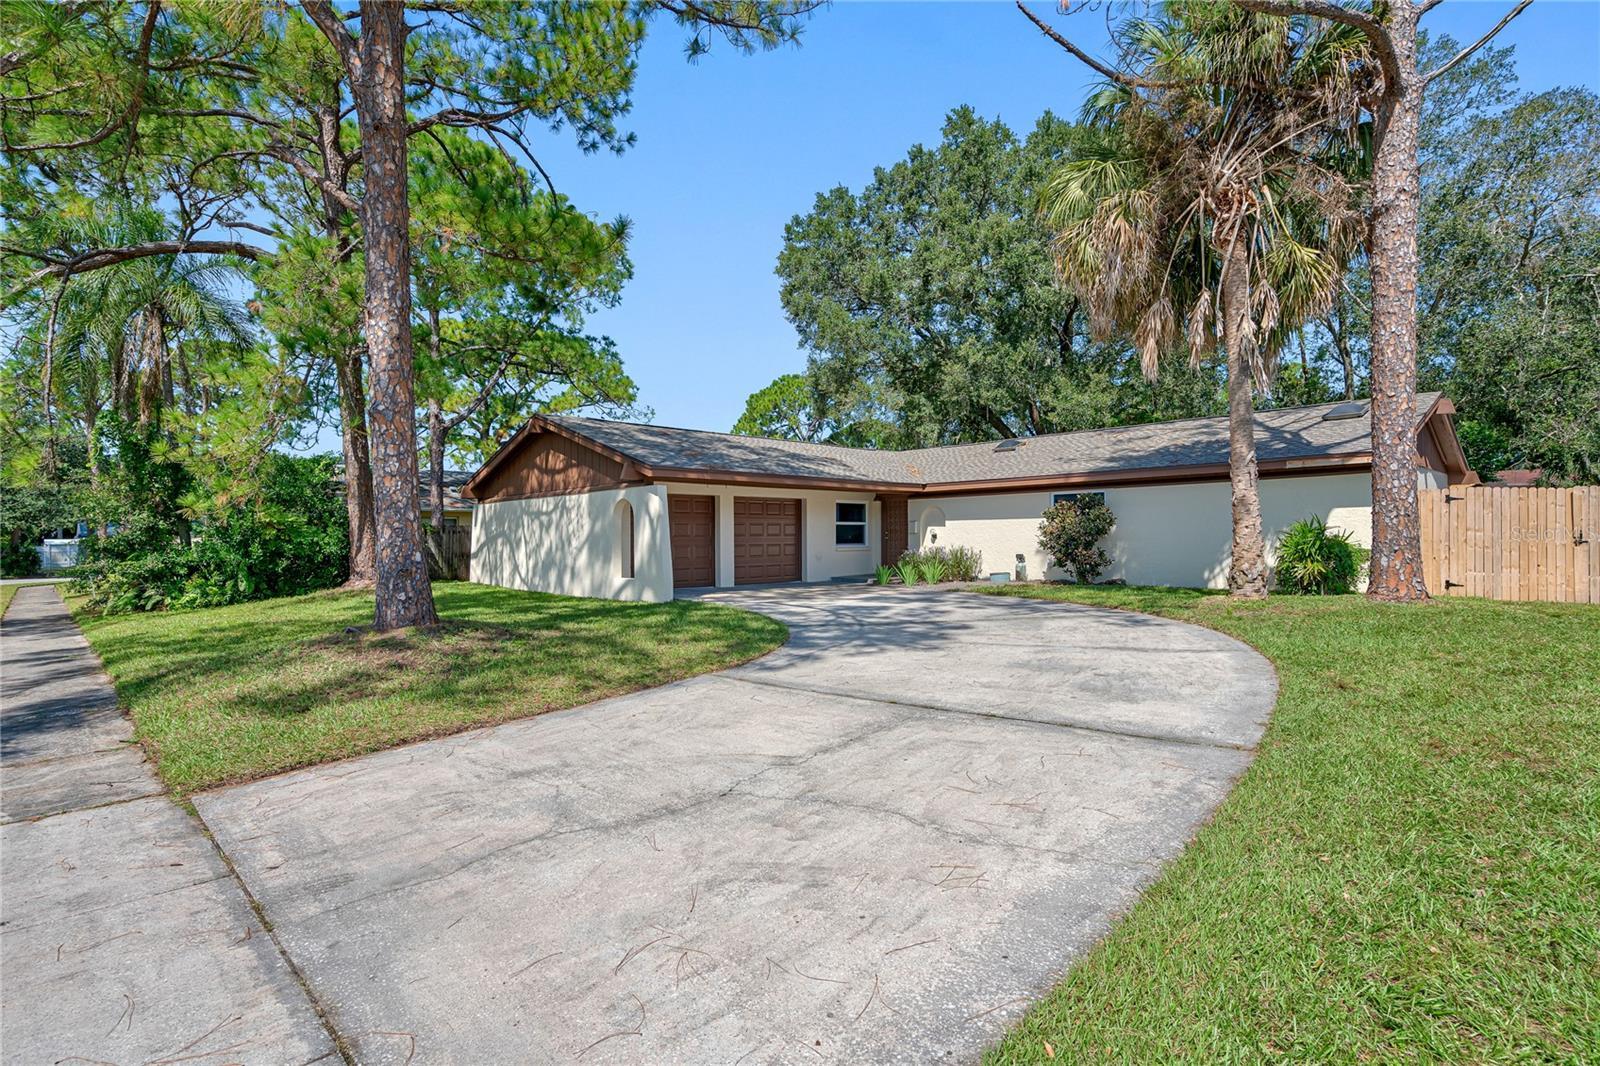 Photo one of 8321 W Pocahontas Ave Tampa FL 33615 | MLS T3503940